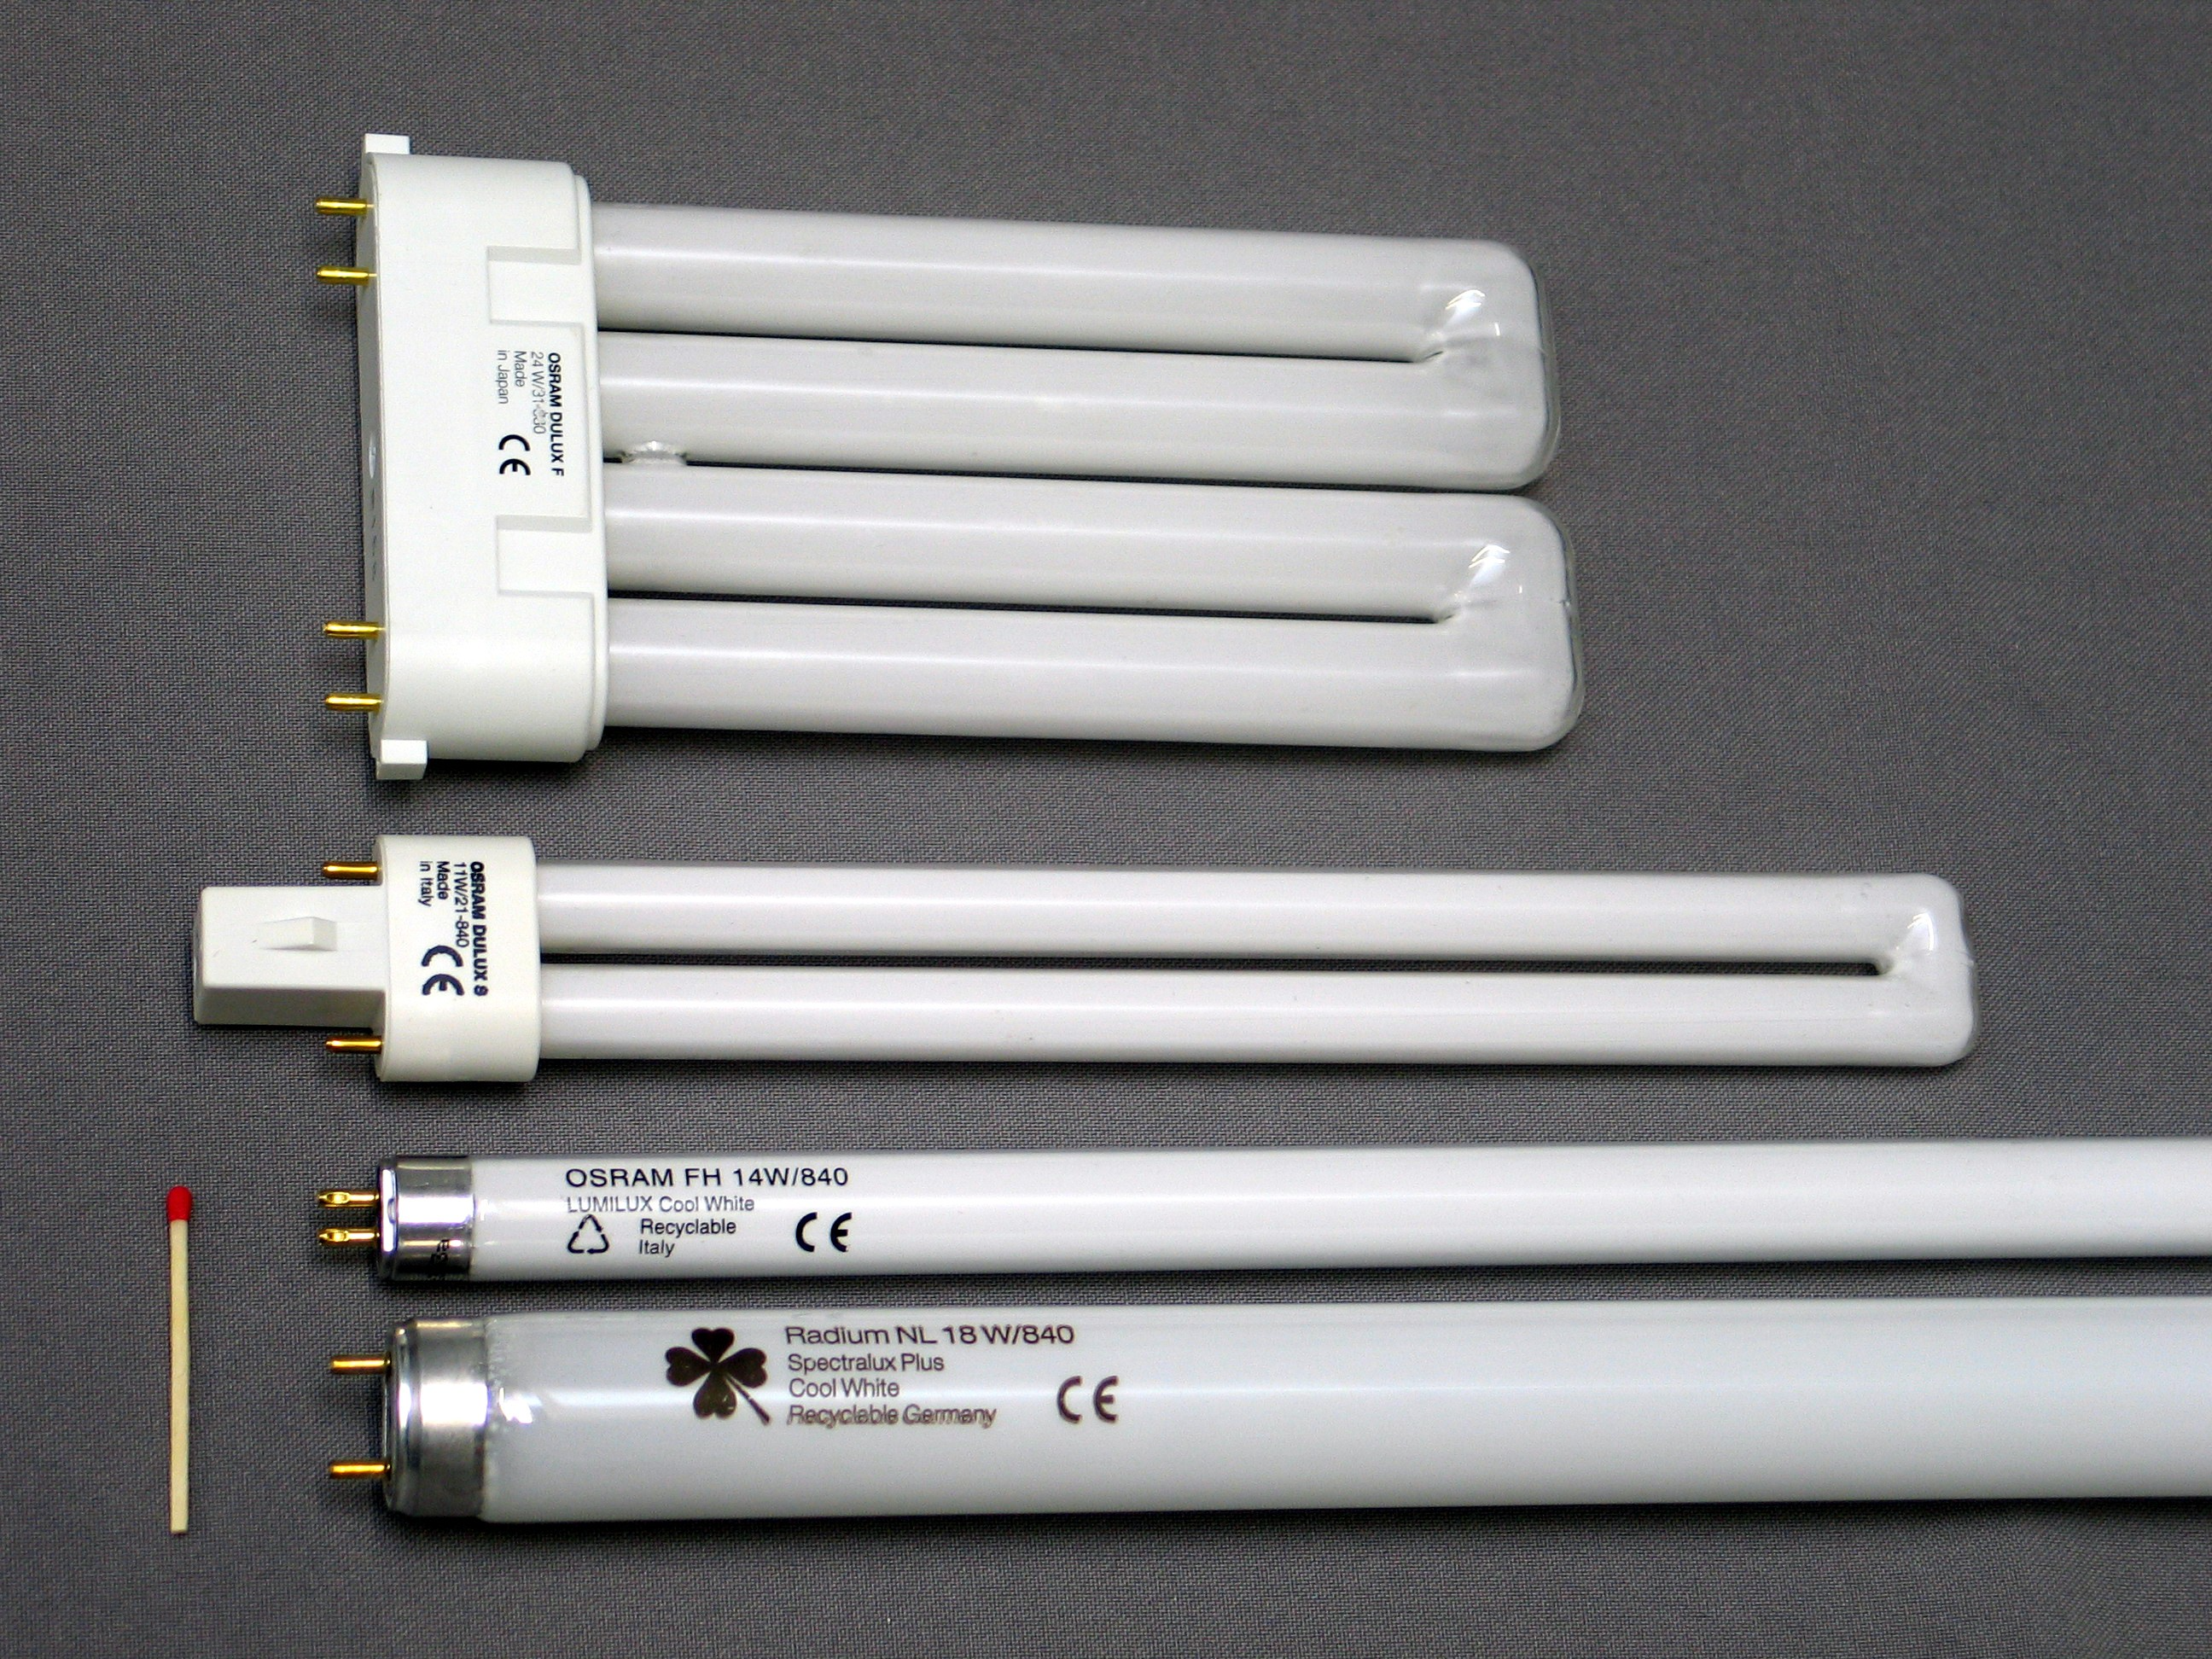 Two tube lights one thicker than the other. Two bulbs are rectangle shaped, instead of long tubes. 